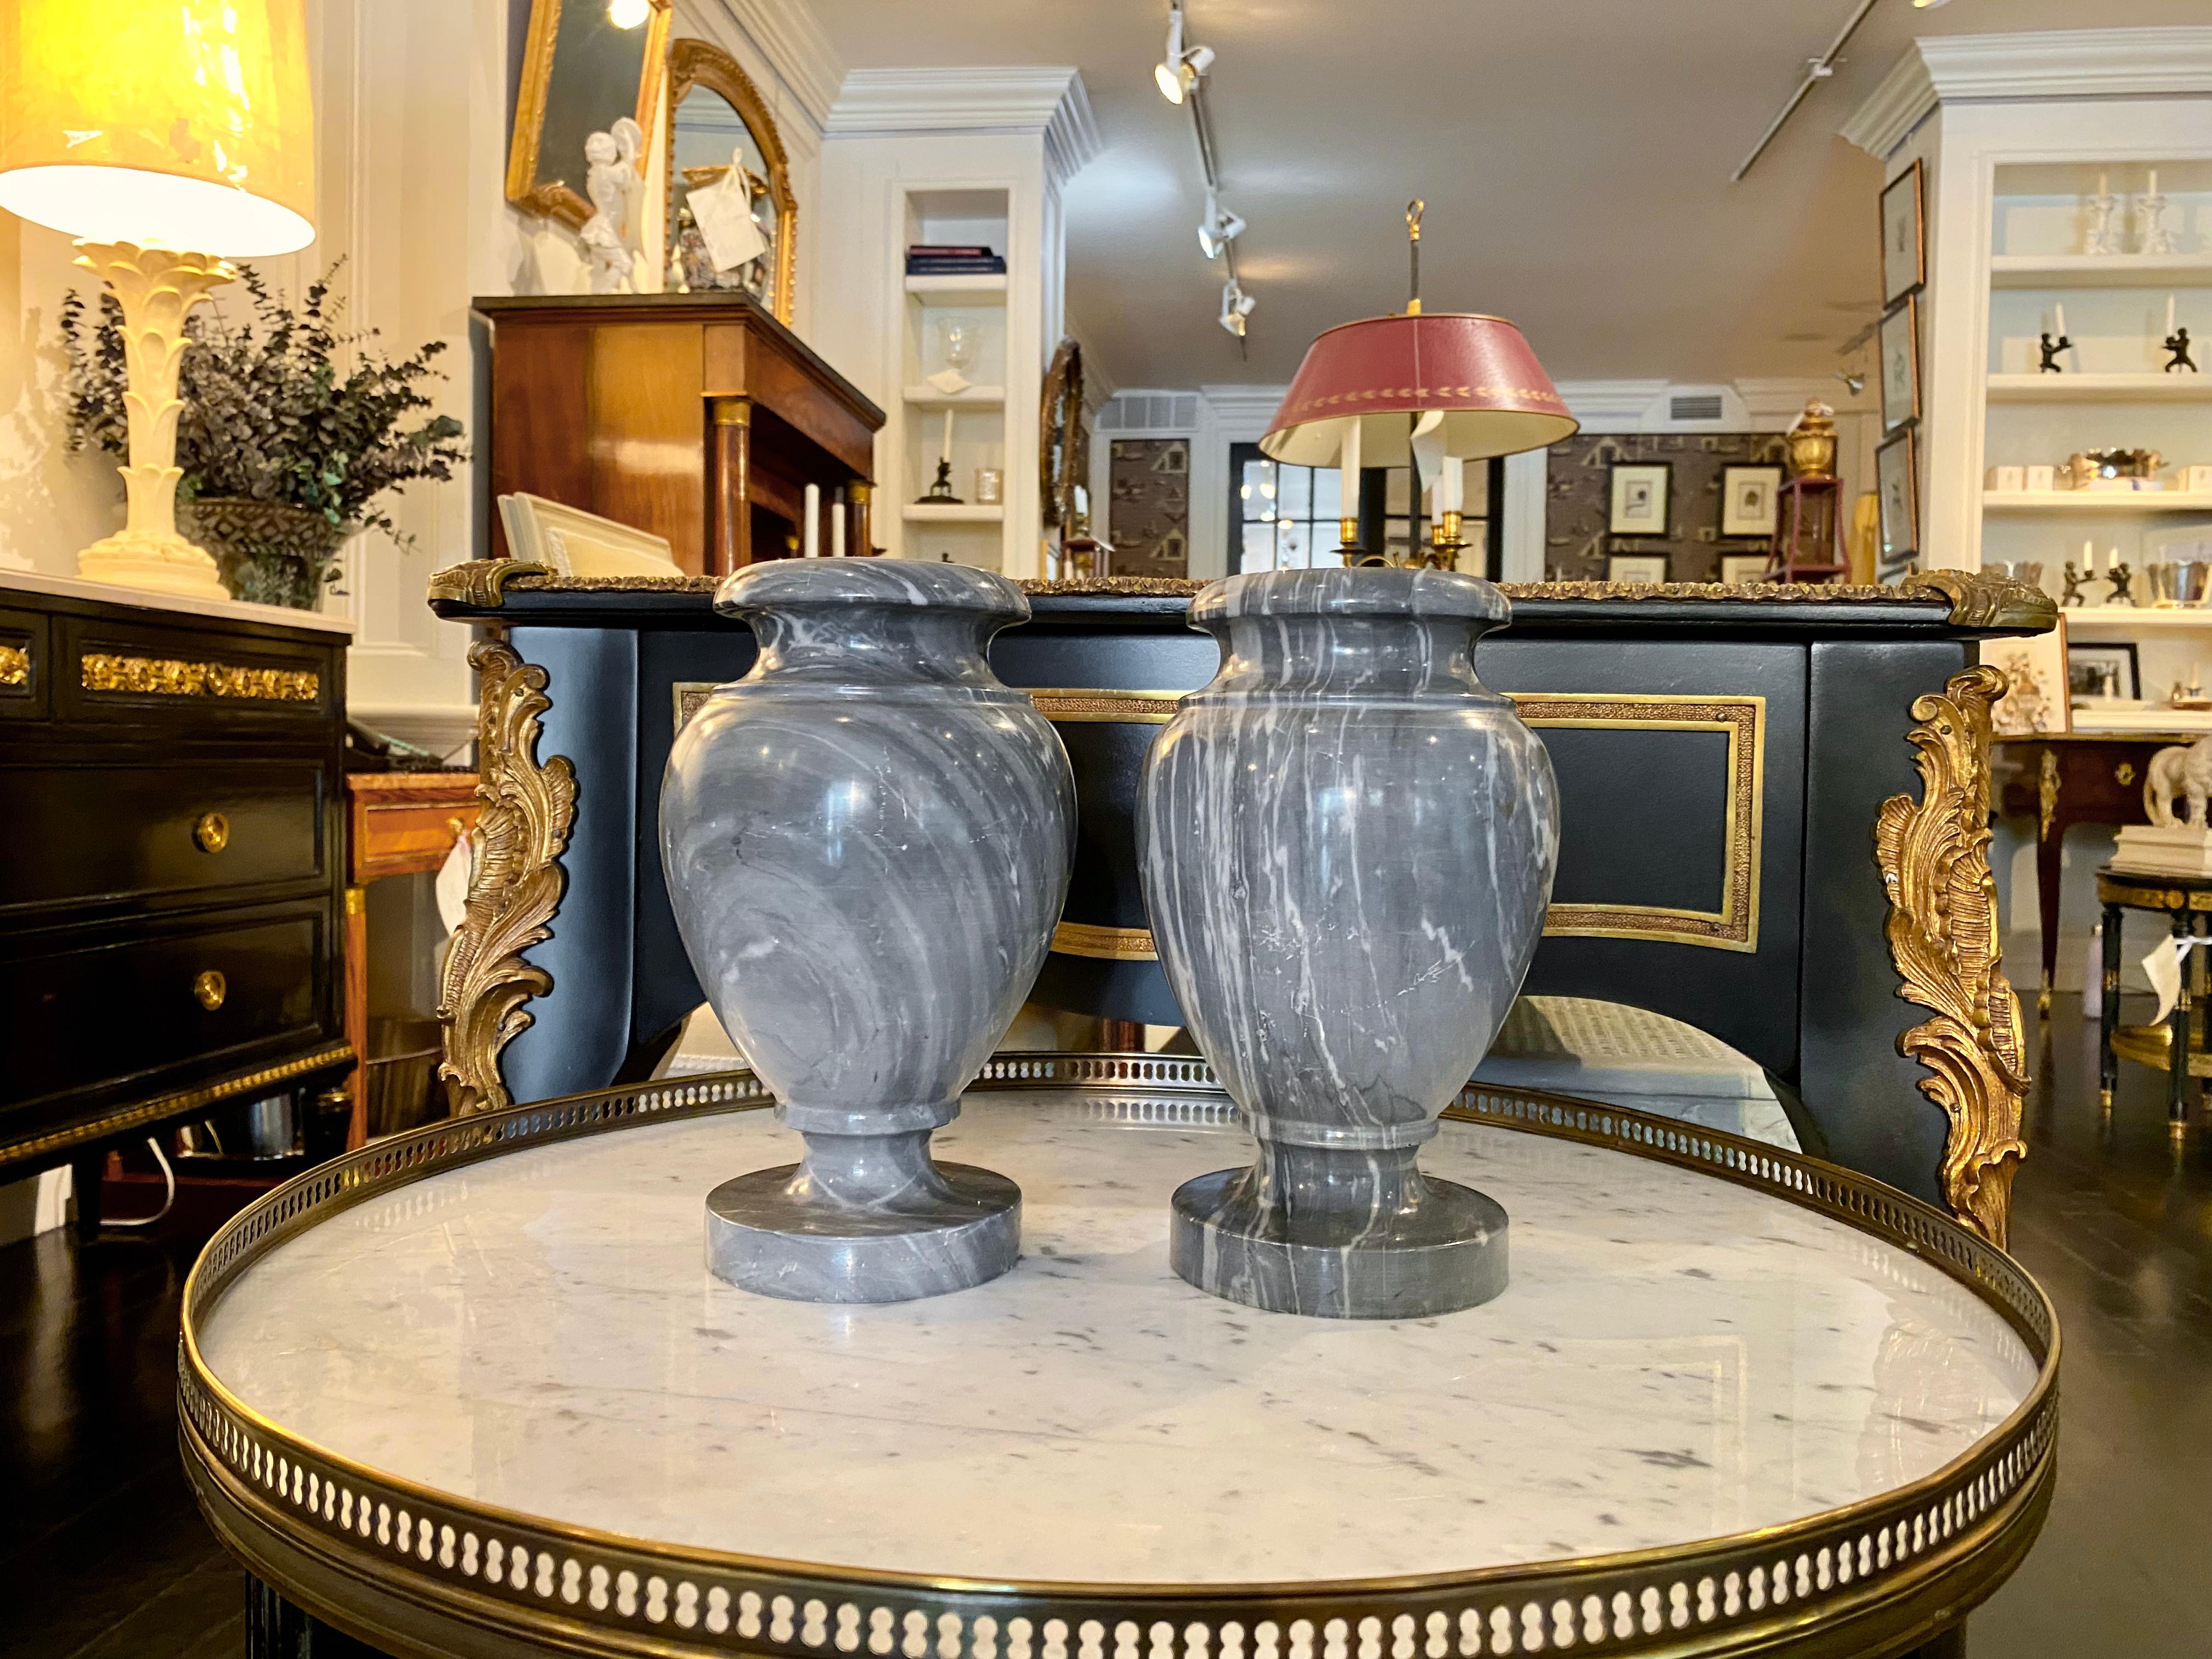 French neoclassical pair of grey marble urns, 20th century
Beautiful and highly decorative pair of white veined, grey marble urns.
Dimensions: 6 in. D x 9.75 in. H.